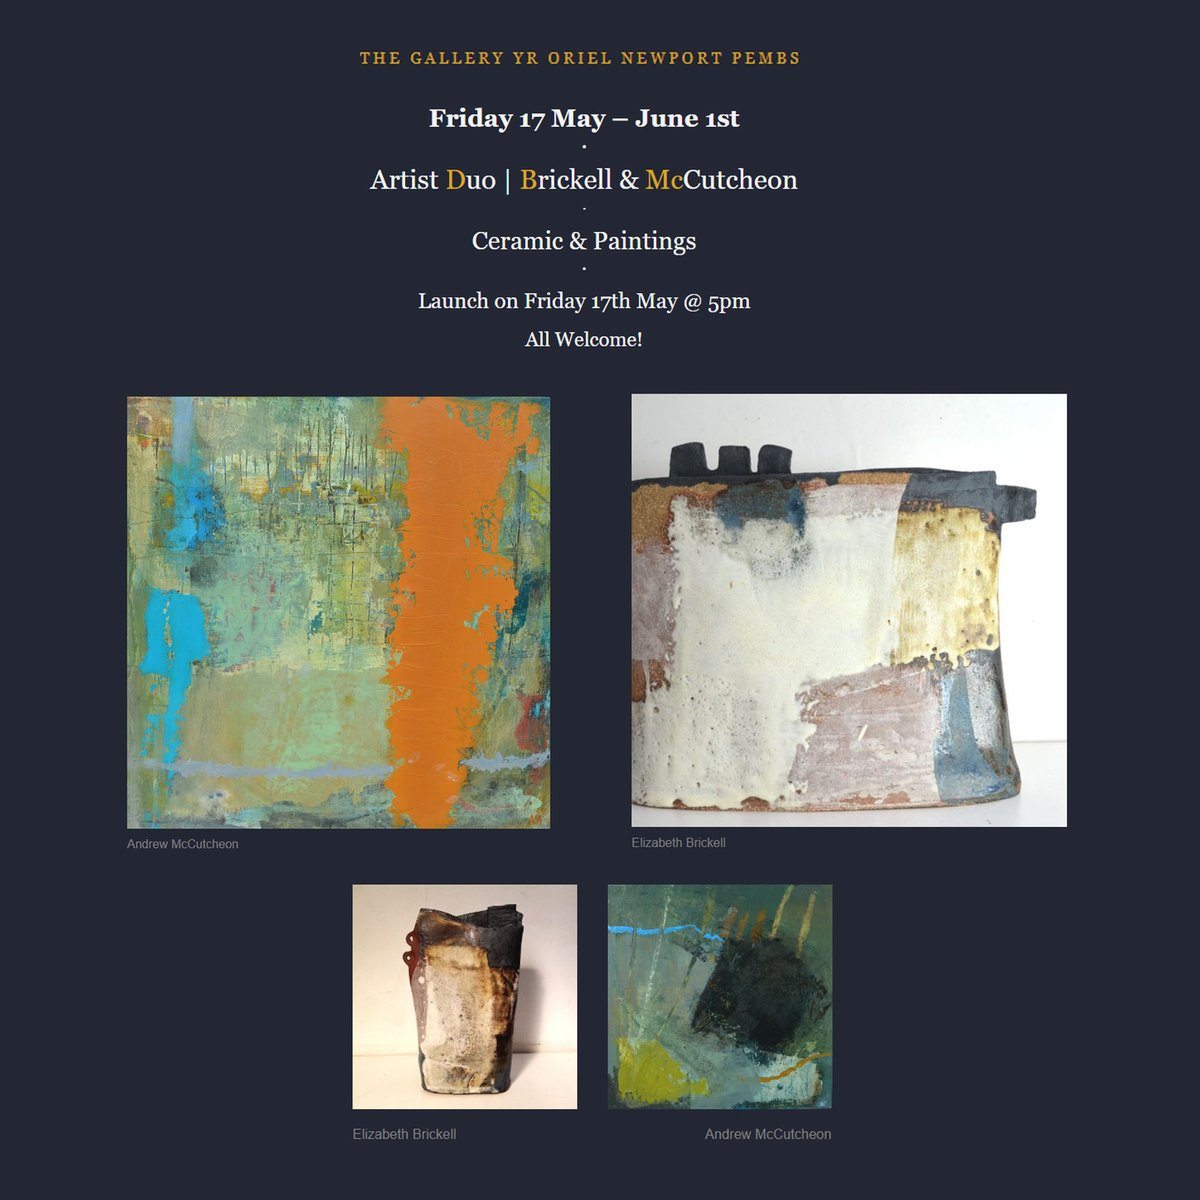 Coming up at The Gallery Yr Oriel Newport Pembs. Friday 17th May - to June 1st...